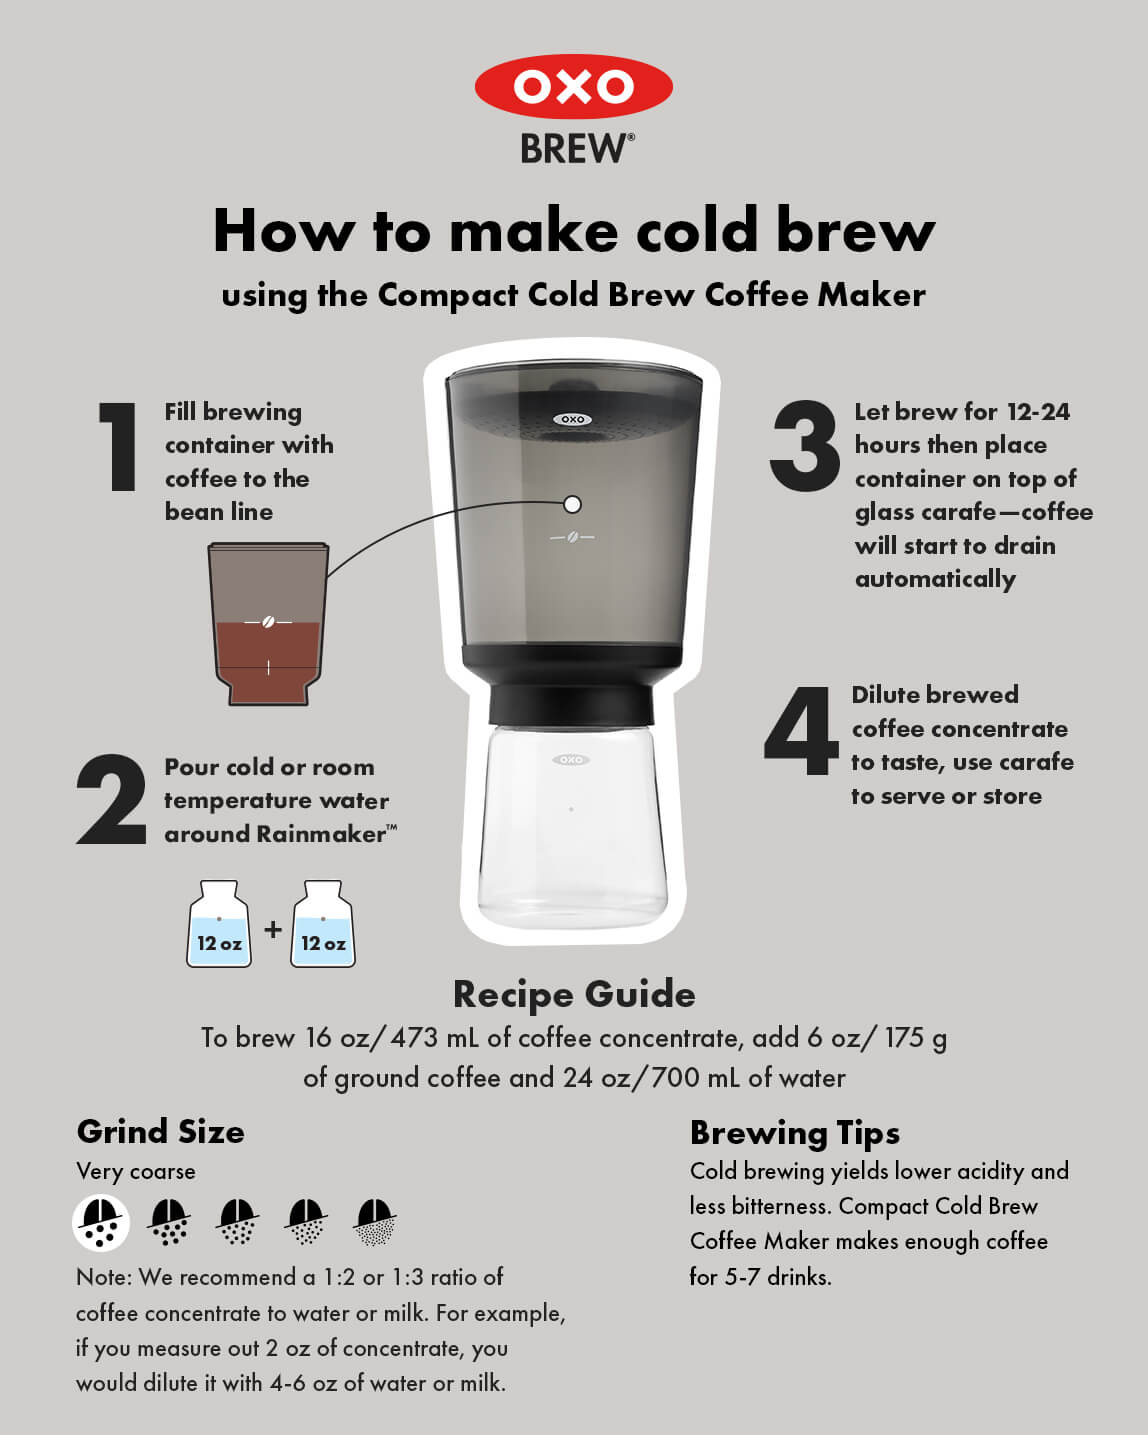 How to Use the OXO Compact Cold Brew Coffee Maker